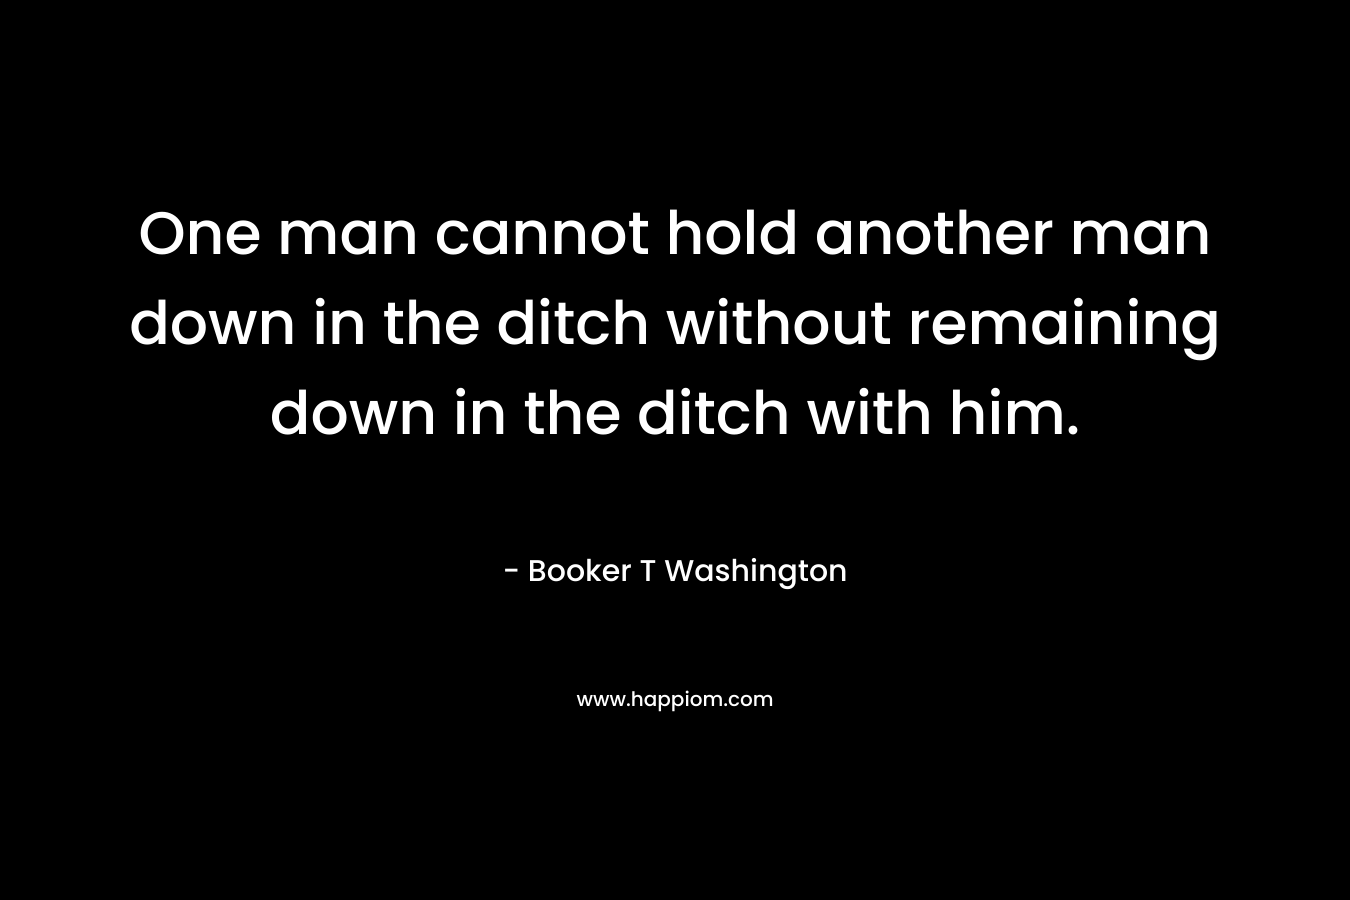 One man cannot hold another man down in the ditch without remaining down in the ditch with him.